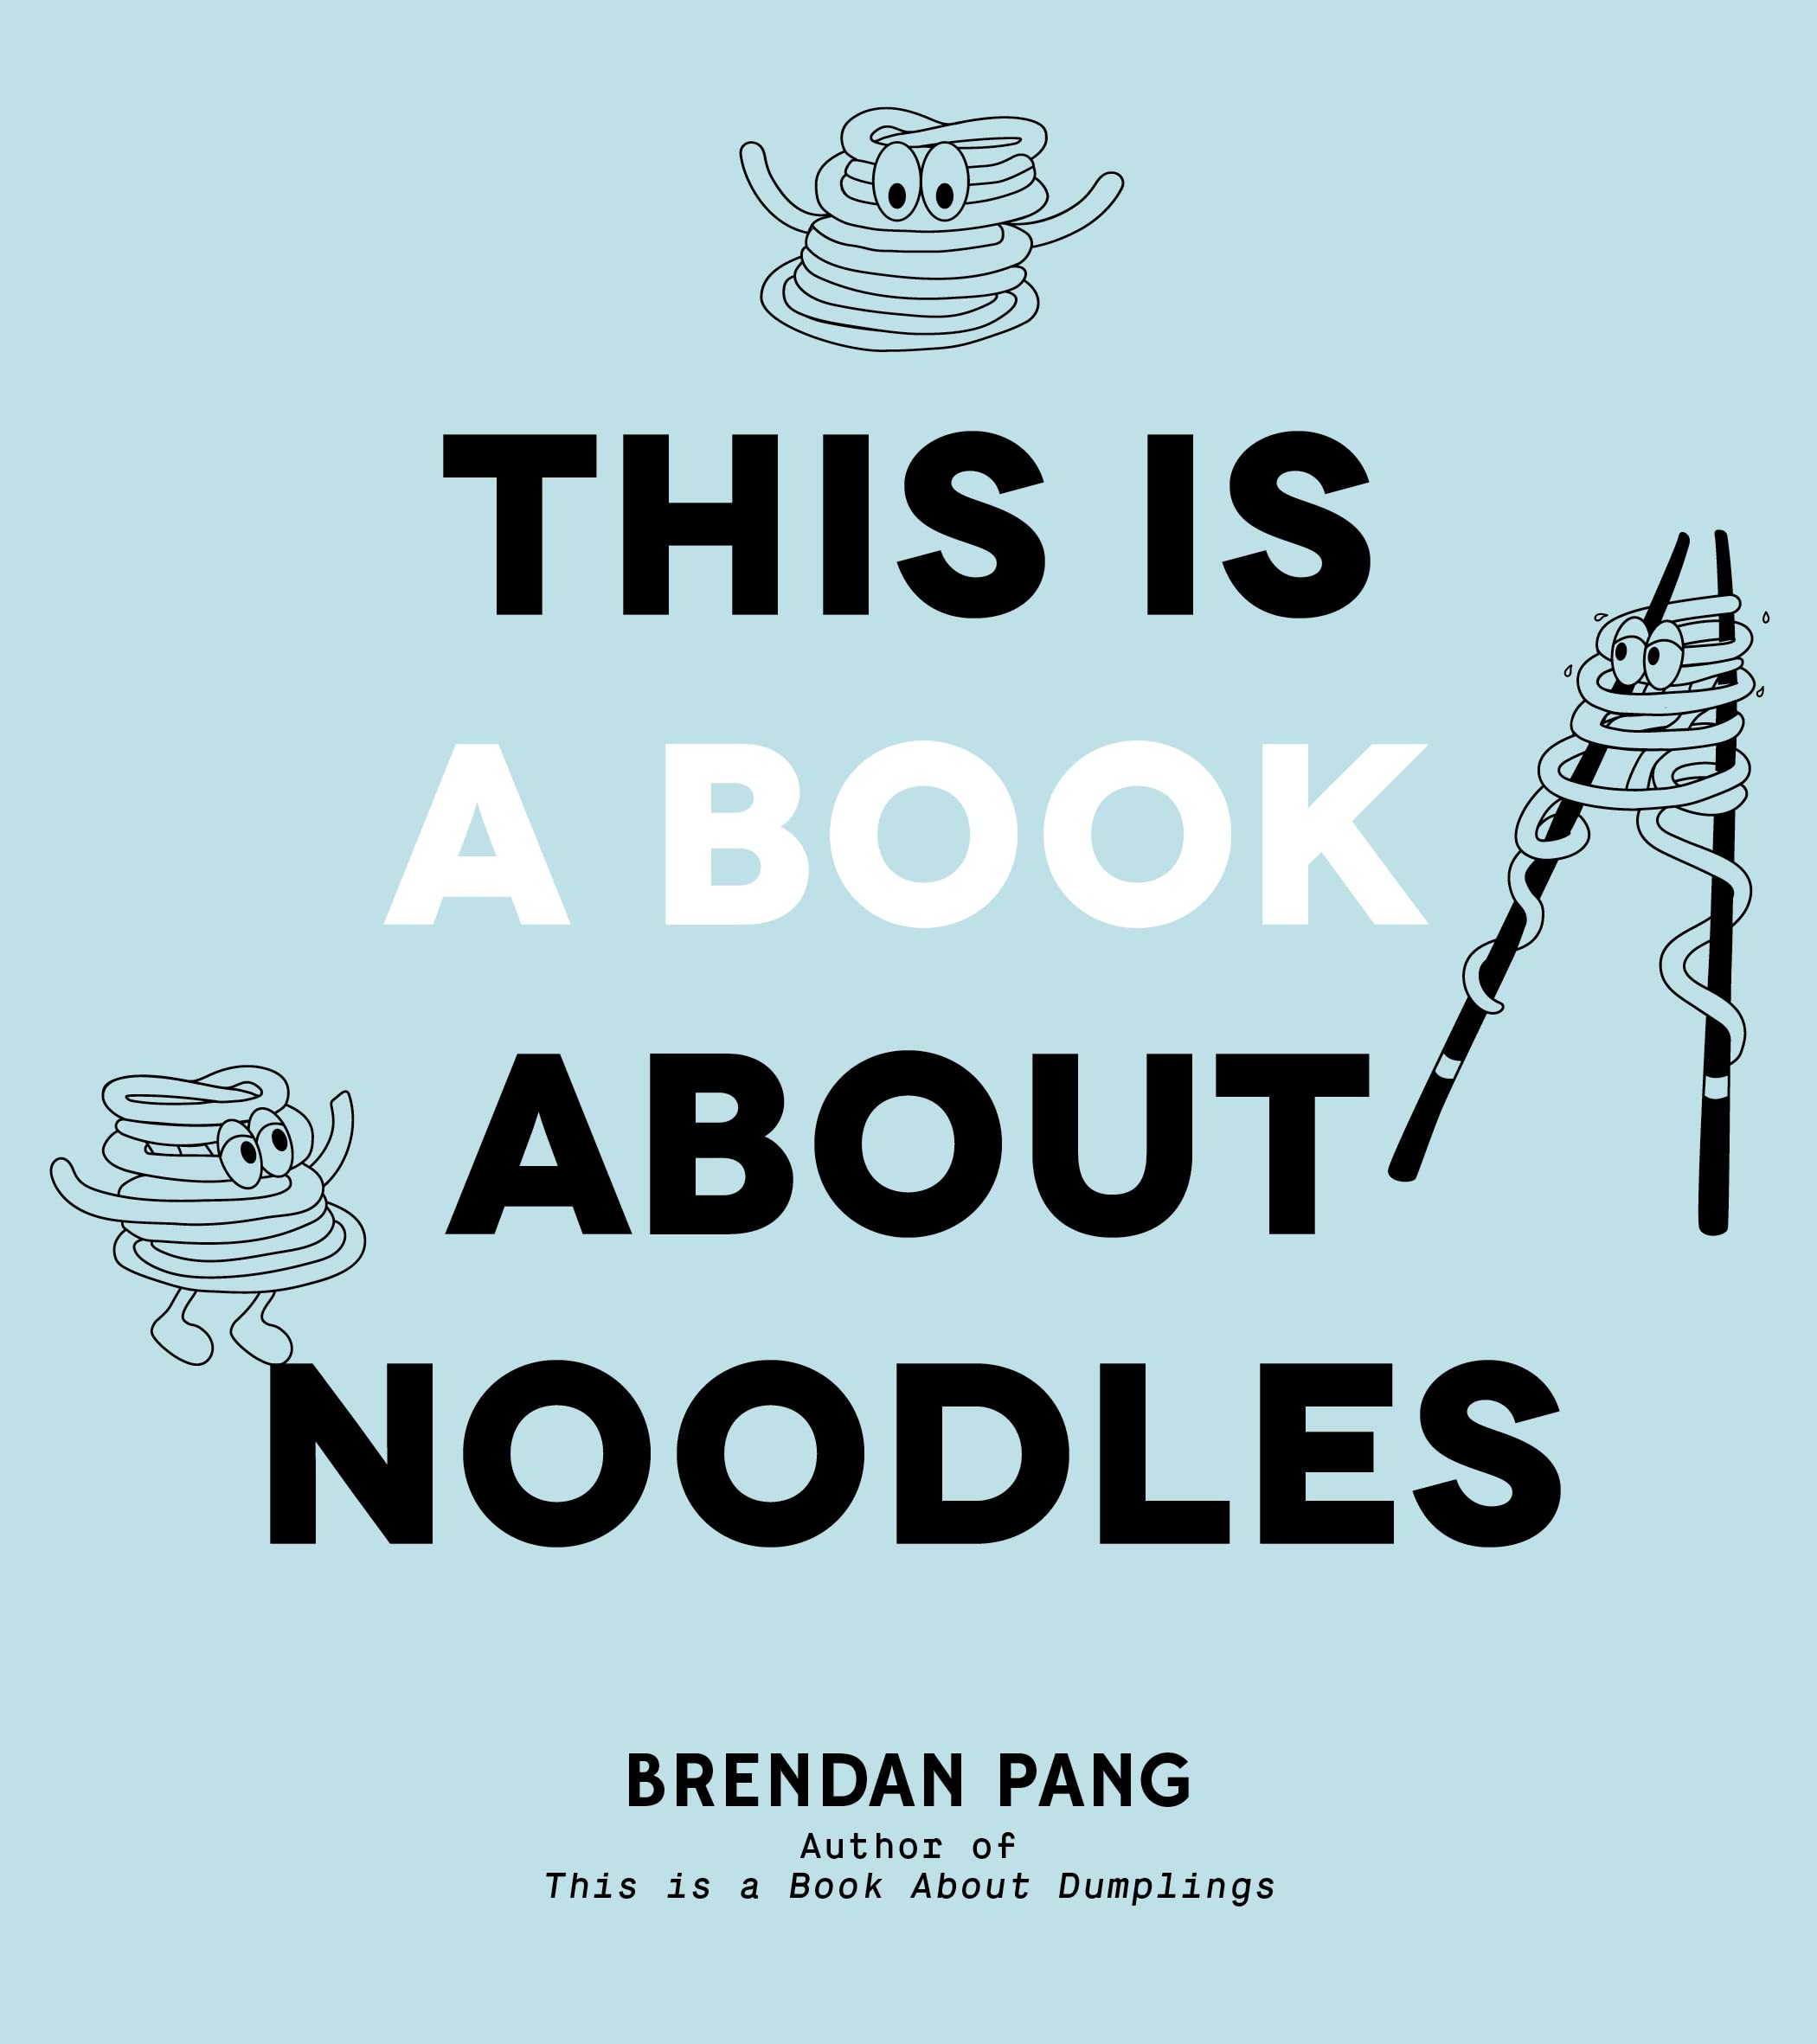 This Is a Book About Noodles (Brendan Pang)